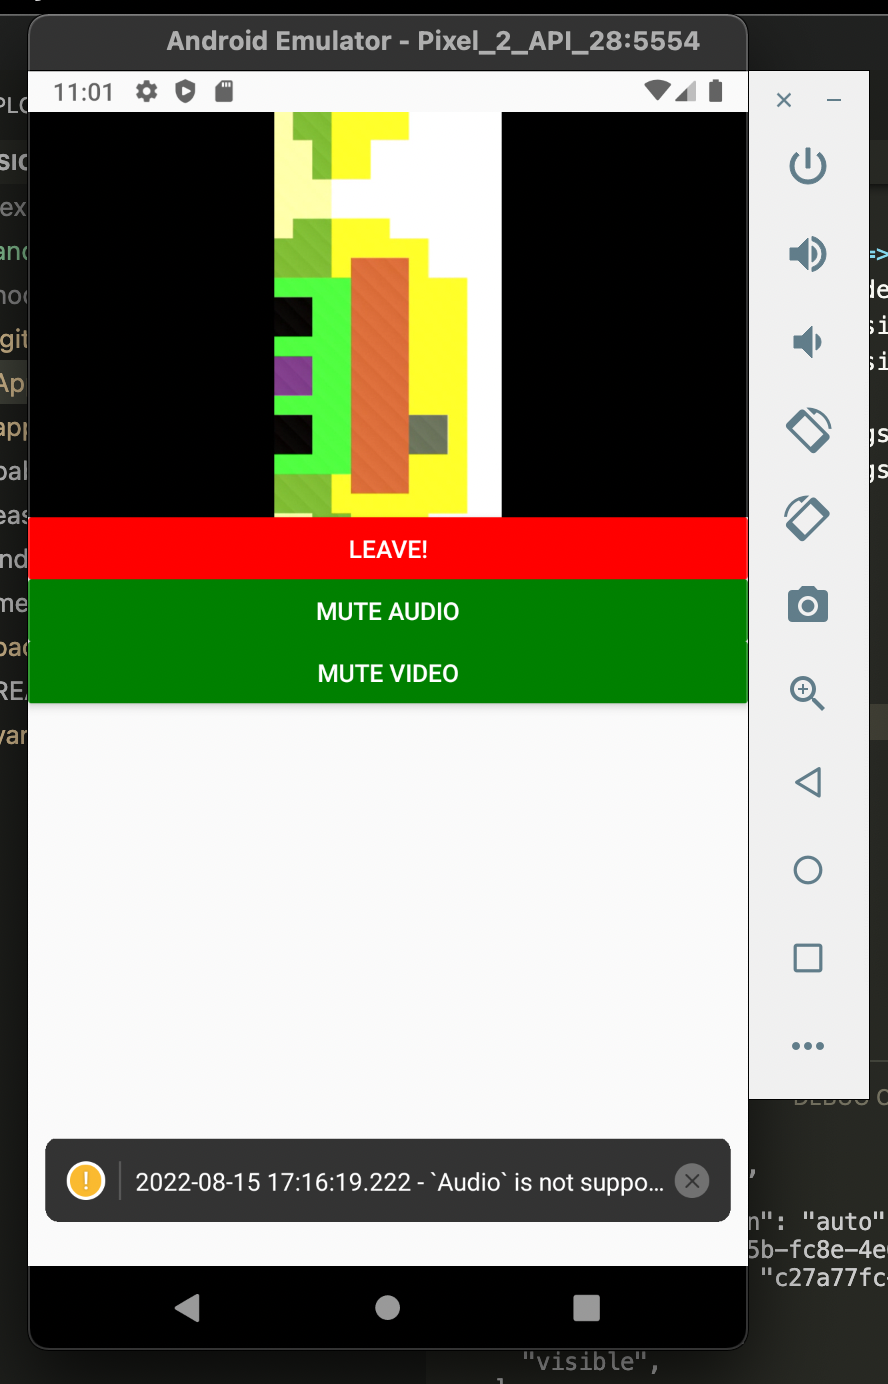 A screenshot of the React Native application. Buttons beneath the video allow the user to Leave, Mute or Unmute Audio, and Mute or Unmute Video.